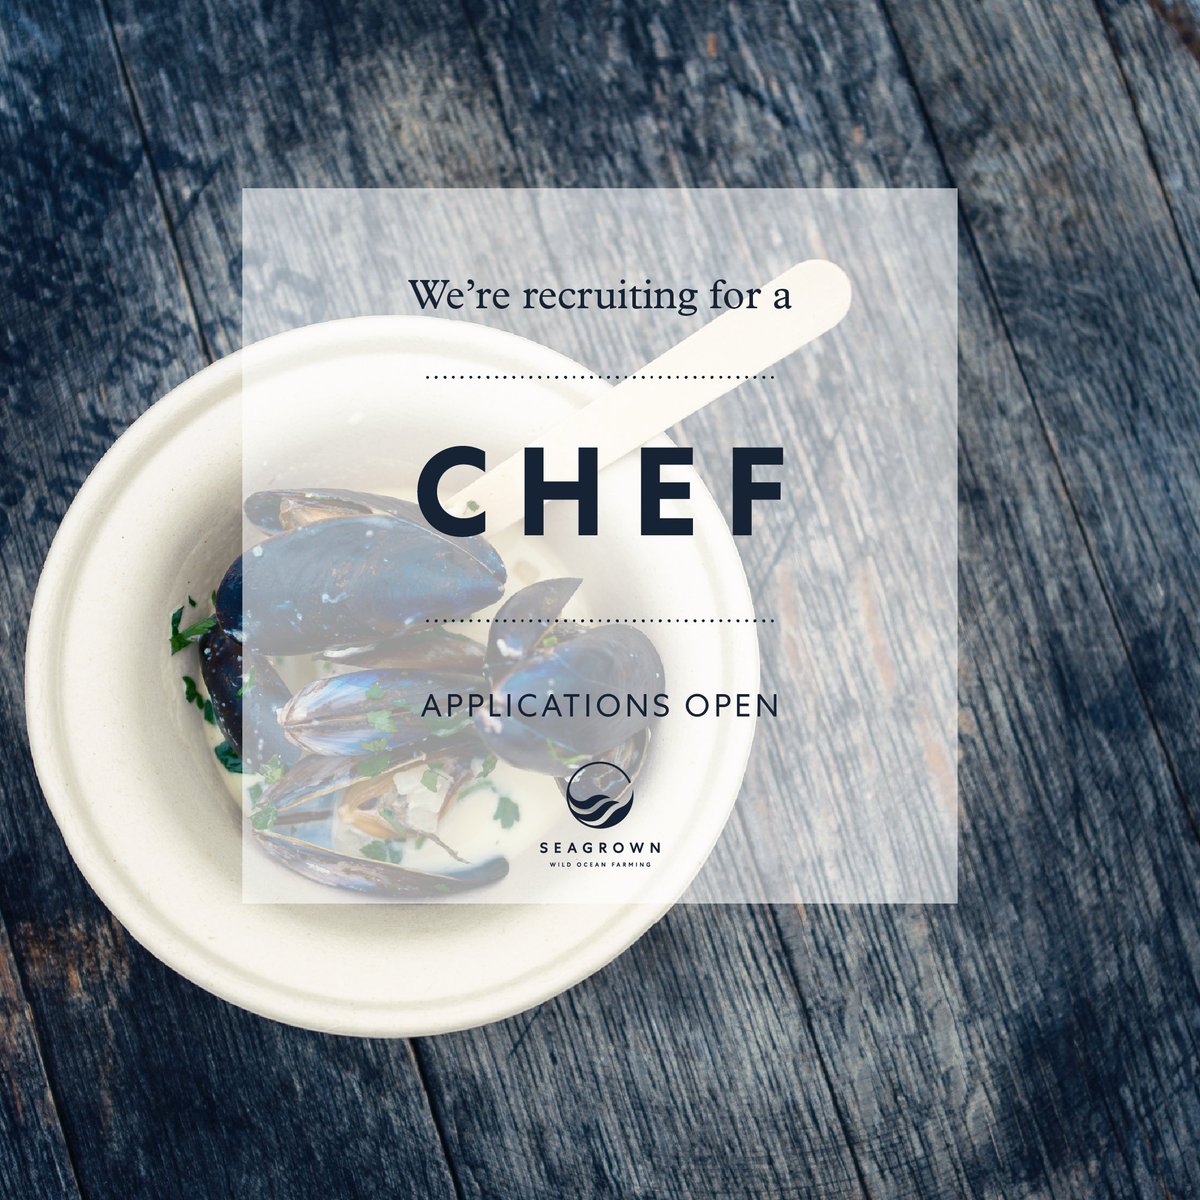 Aspiring seafood chef wanted! Full details at: adobe.ly/3JlCGsi Full training and qualifications are given! Apply by sending your CV and cover letter to southernstar@seagrown.co.uk #SeaGrownCentre #seafoodchef #jobopening